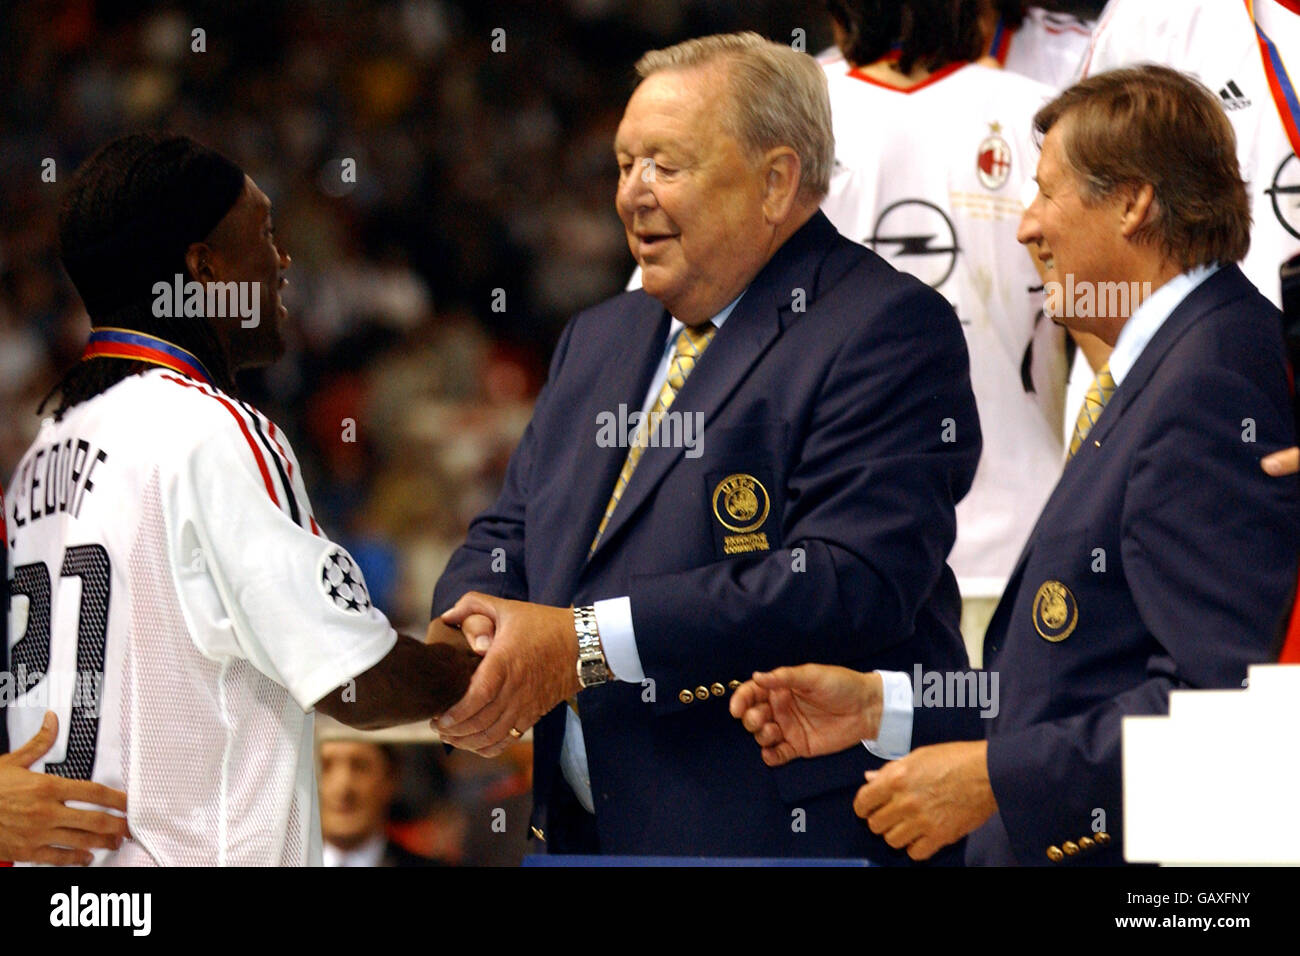 AC Milan's Clarence Seedorf (l) is presented with his winners medal by UEFA President Lennart Johansson and UEFA Chief Executive Gerhard Aigner (r) who congratulate him on becoming the first player to win the trophy for three different teams Stock Photo